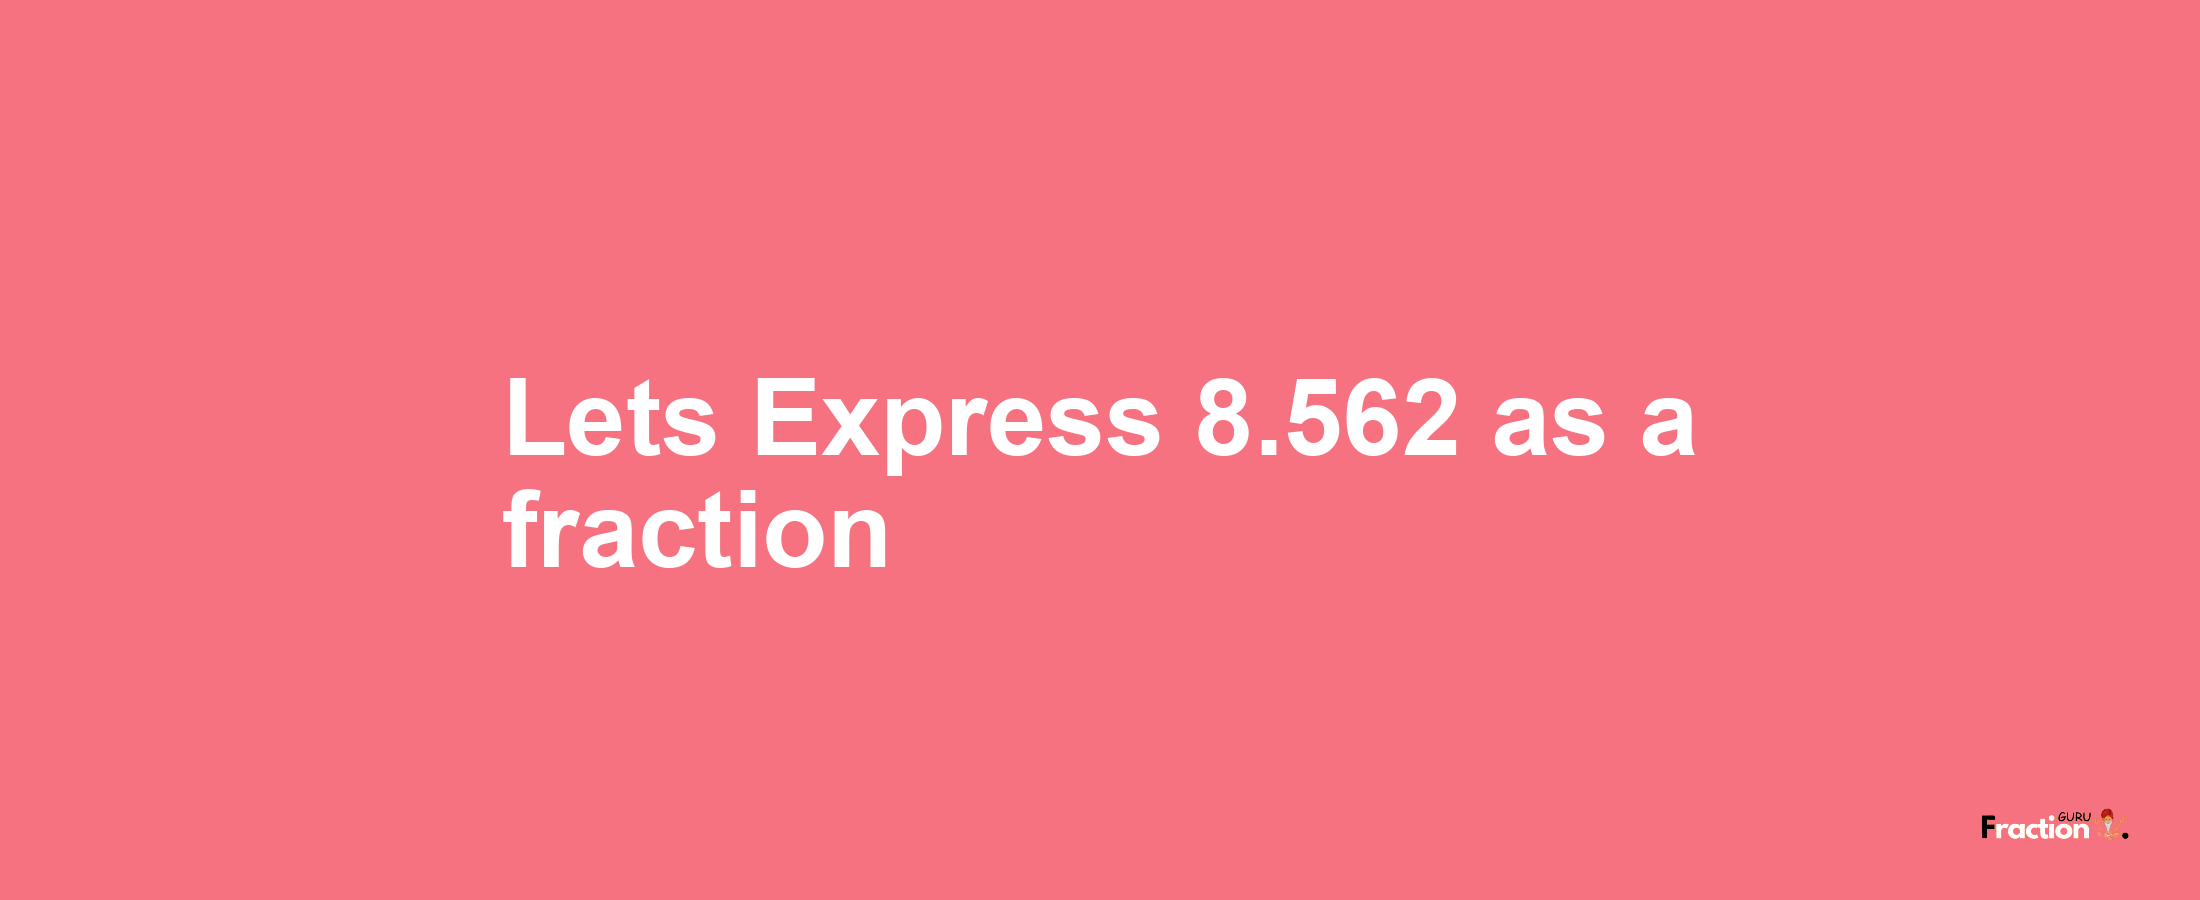 Lets Express 8.562 as afraction